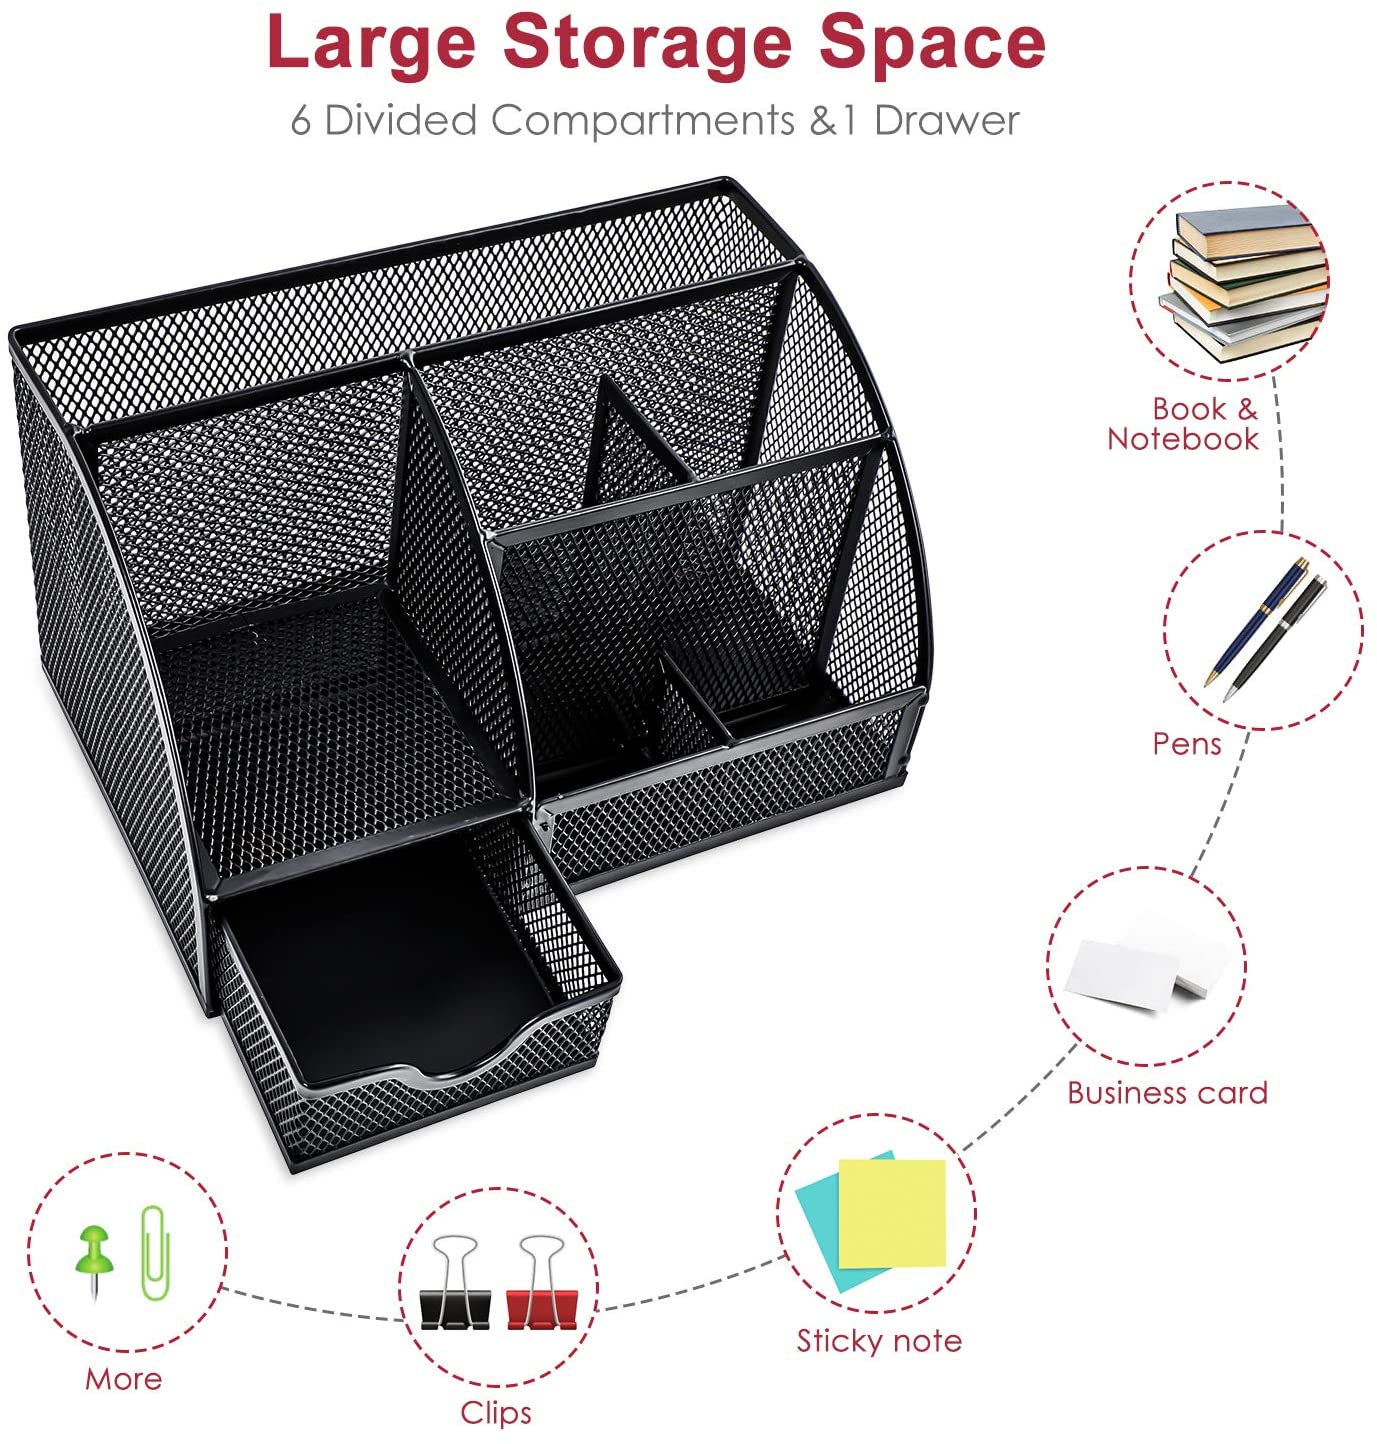 Multifunctional Office Accessories Mesh Office Supplies Desk Organizer Caddy with 6 Compartments for Home Office ,School - image 2 of 7